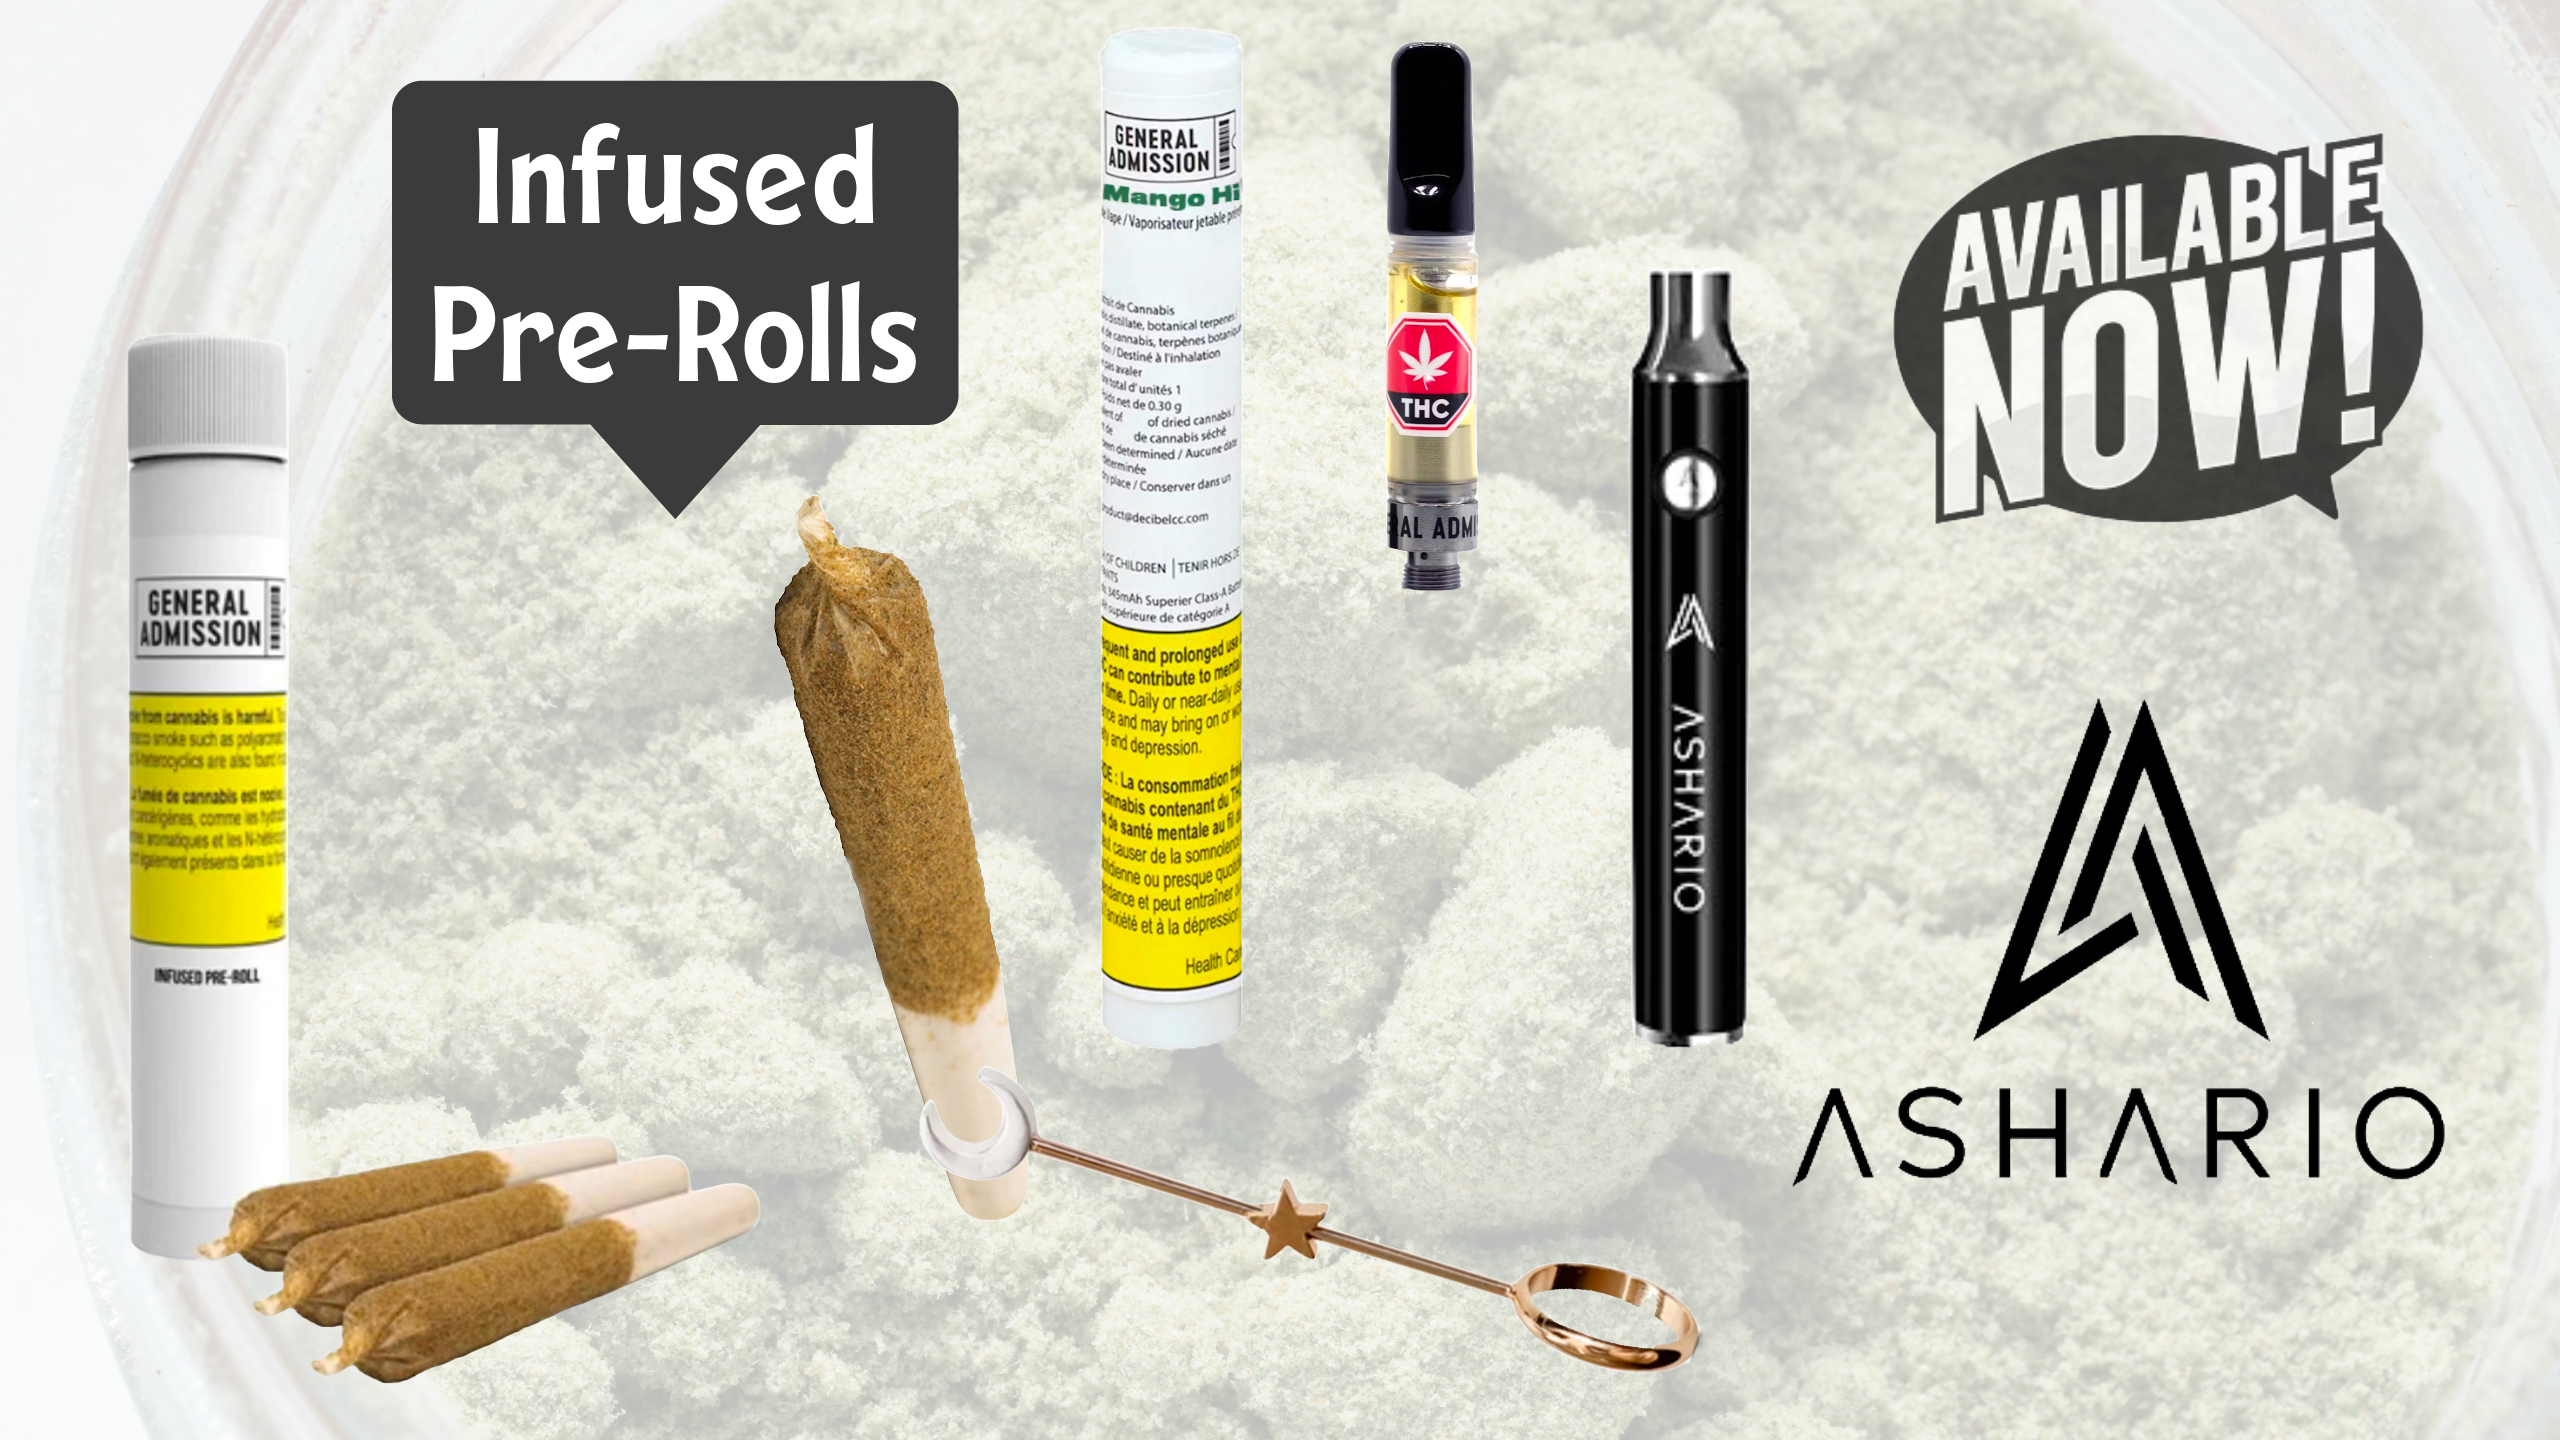 General Admission – The Choice for Premium Disposable Vape Pens, Carts, and Infused Pre-Rolls in Canada